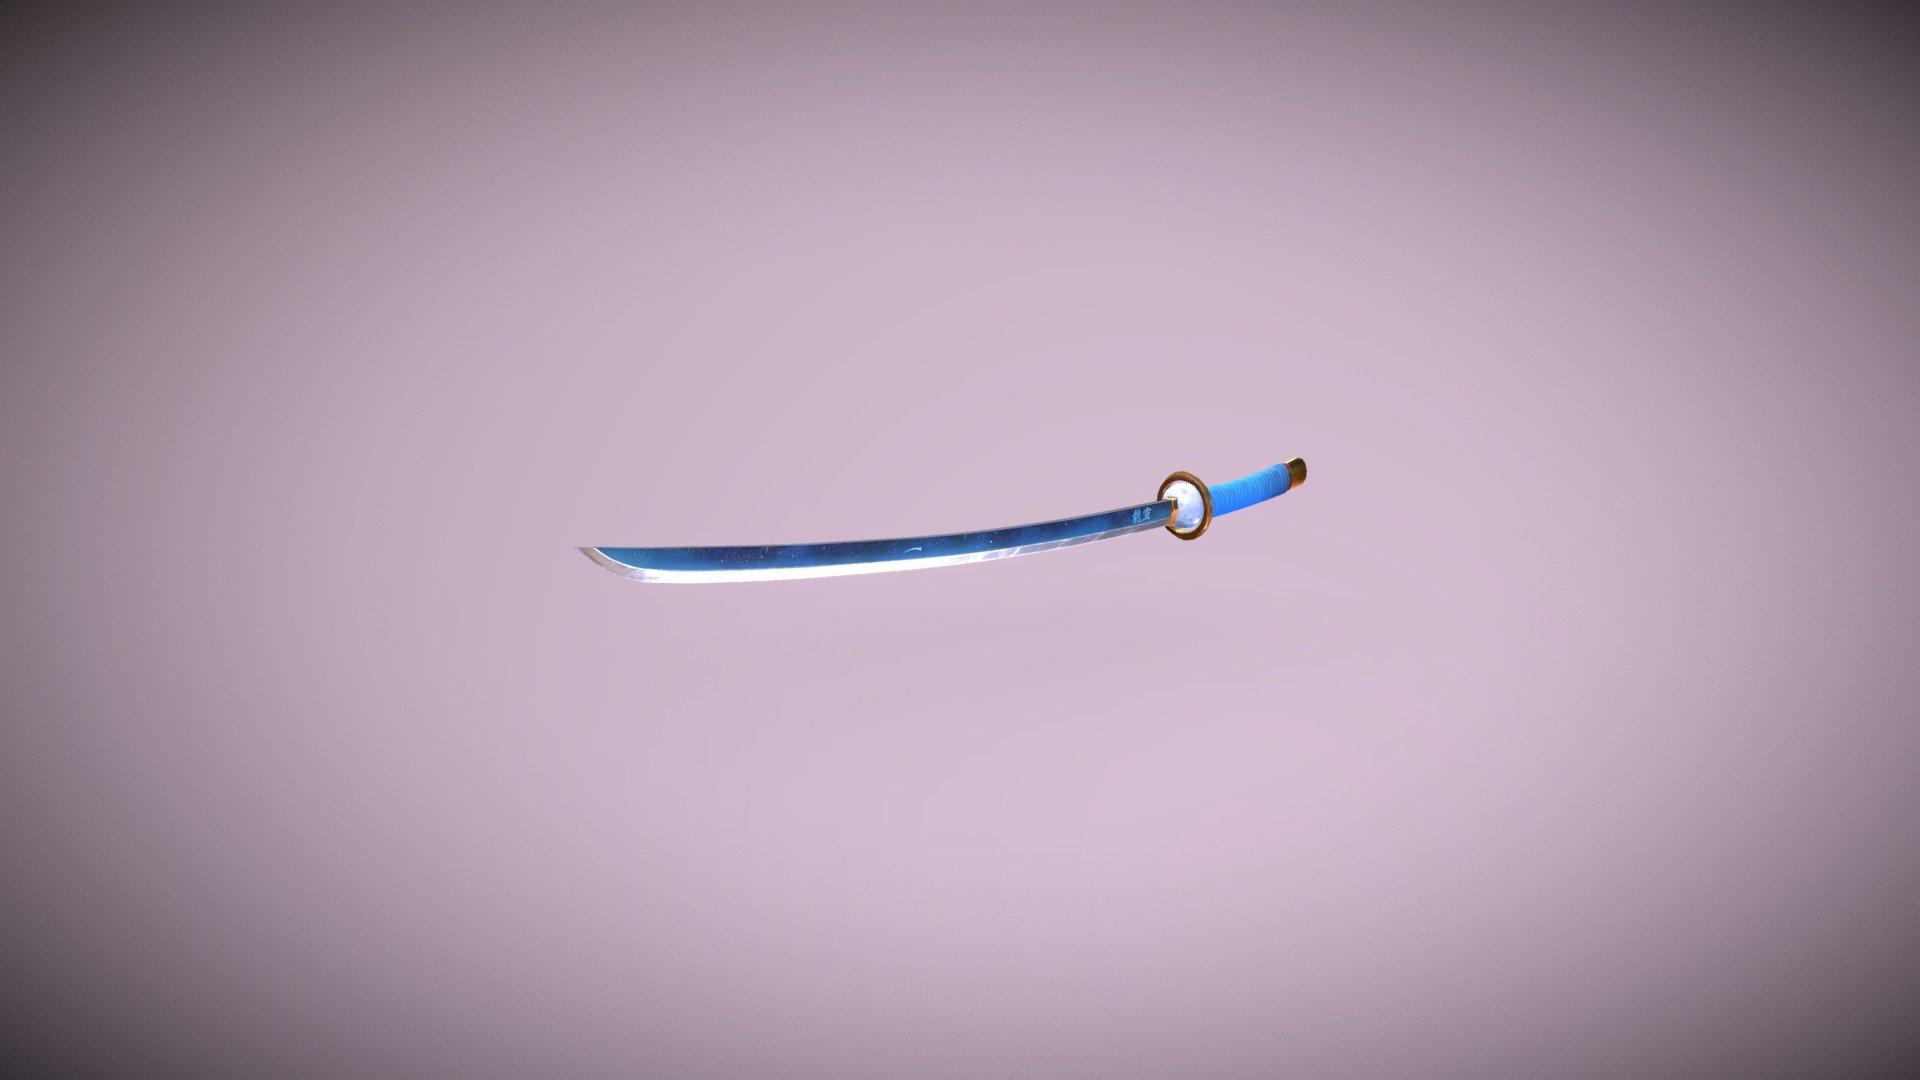 Here's a stylized katana I made on my free time between classes !
Hope you'll like it ! - Stylized Astral Katana - 3D model by Durred 3d model